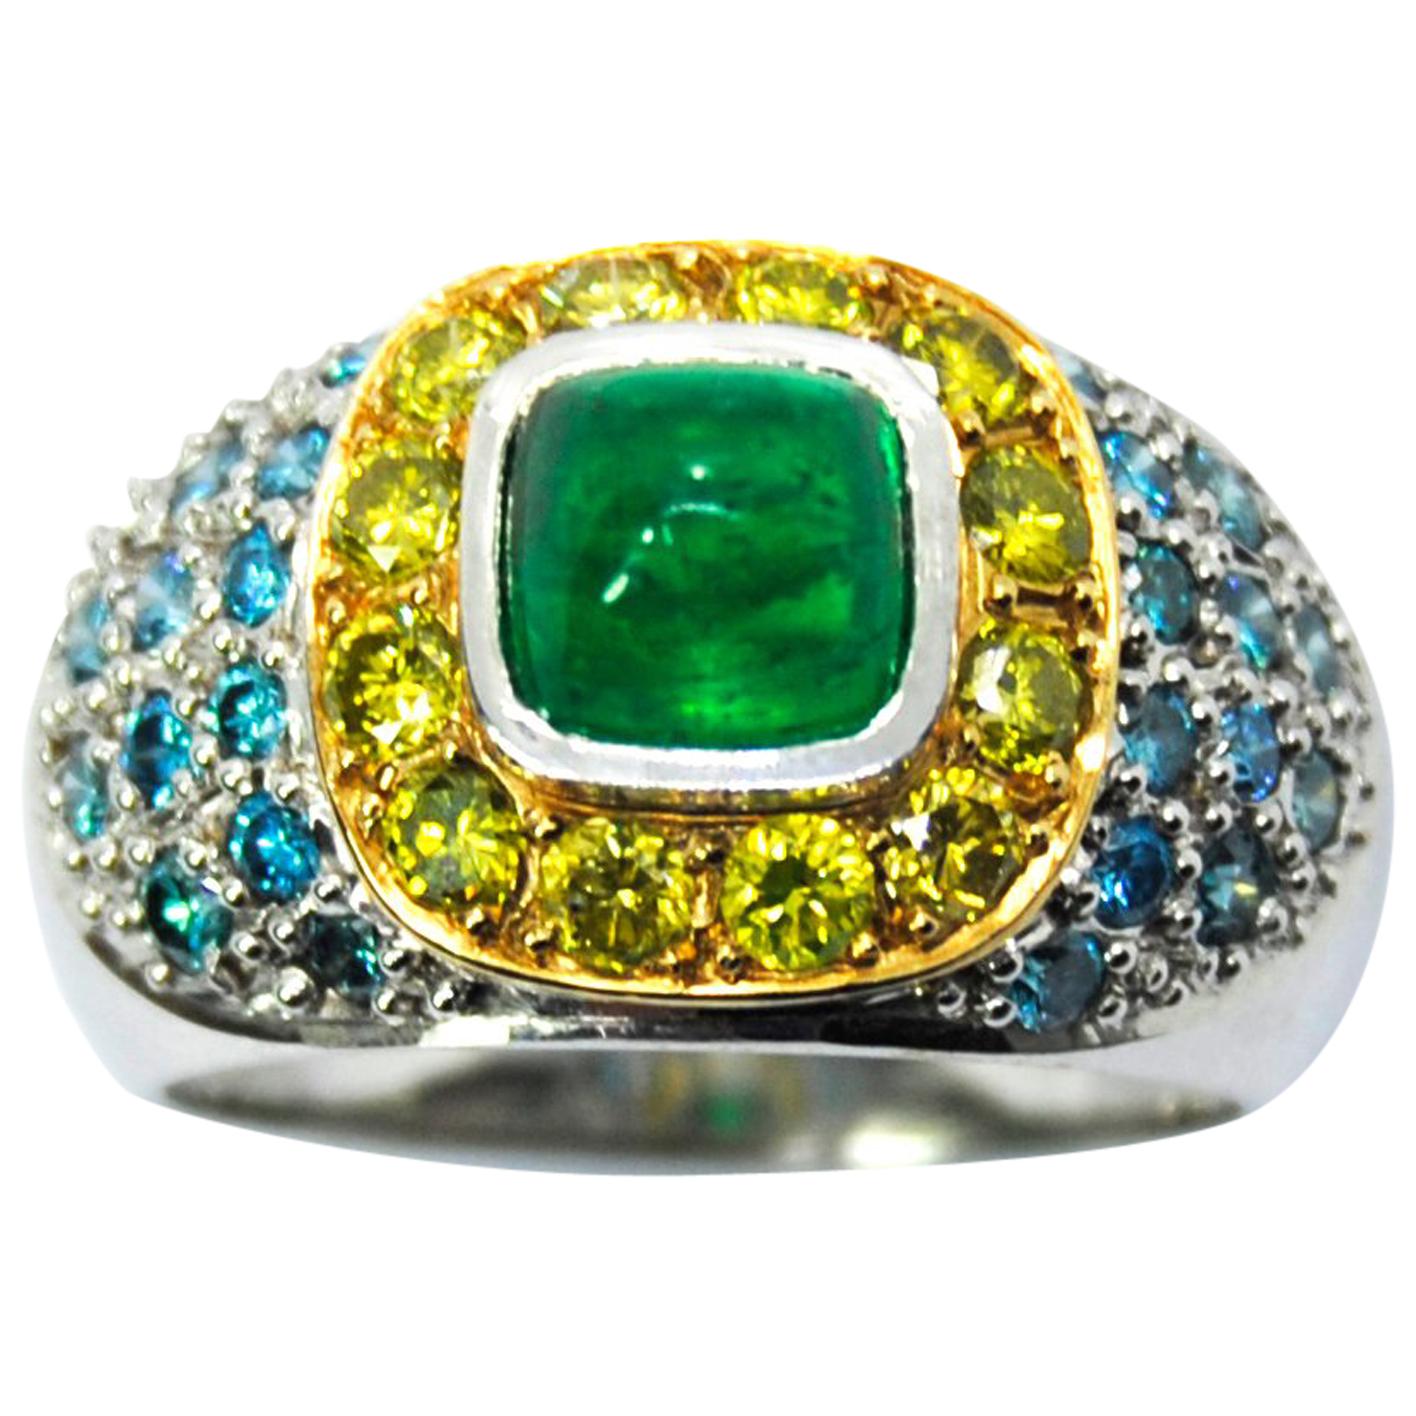 Cabouchon Emerald in a Tray of Blue and Yellow Diamonds in a 18 Karat White Ring